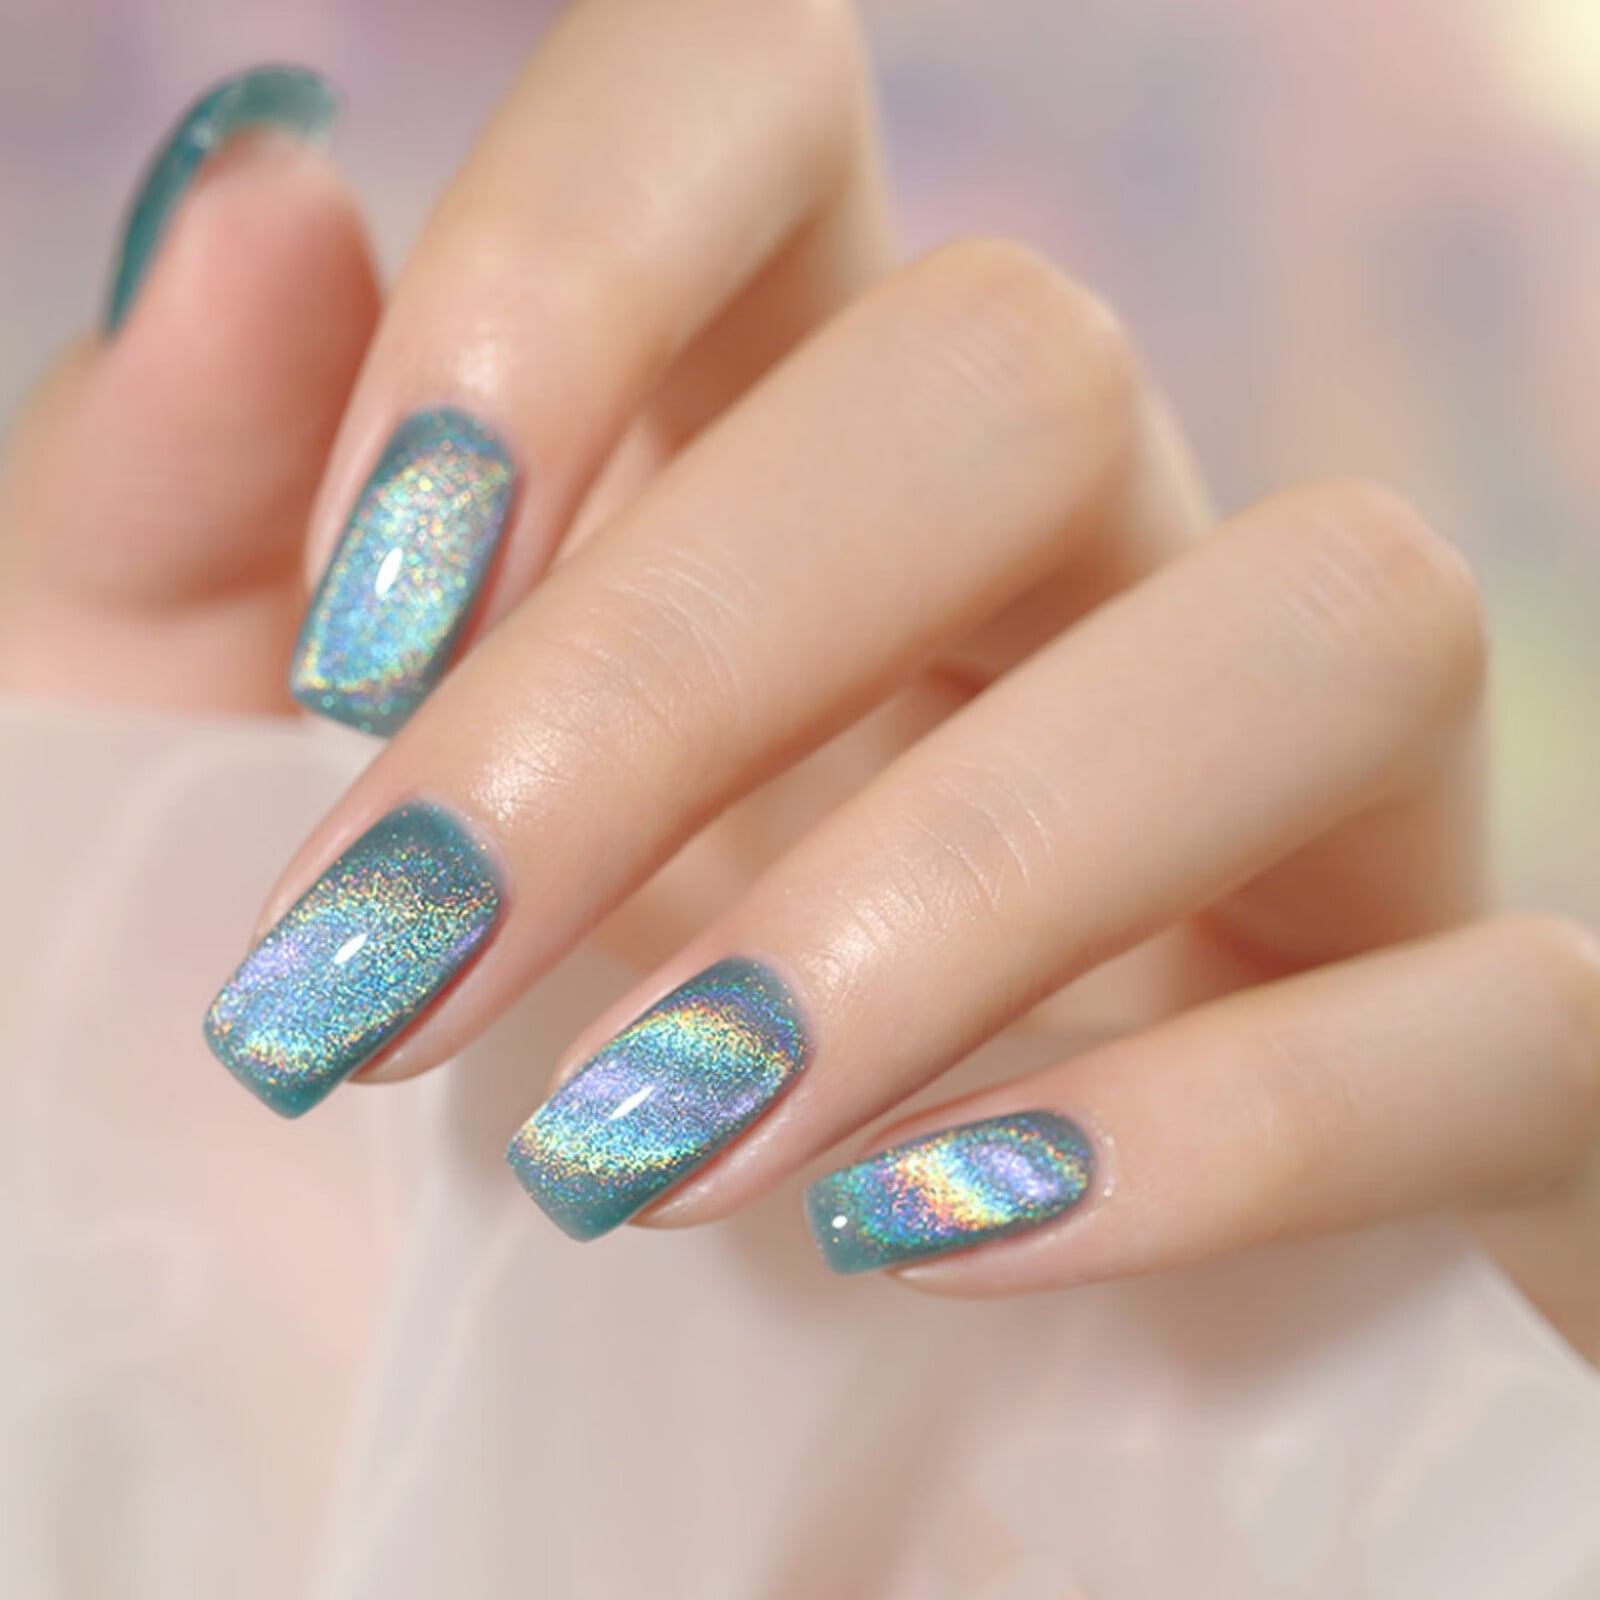 The Best Glitter Nail Designs of 2022 — Nail Designs With Glitter